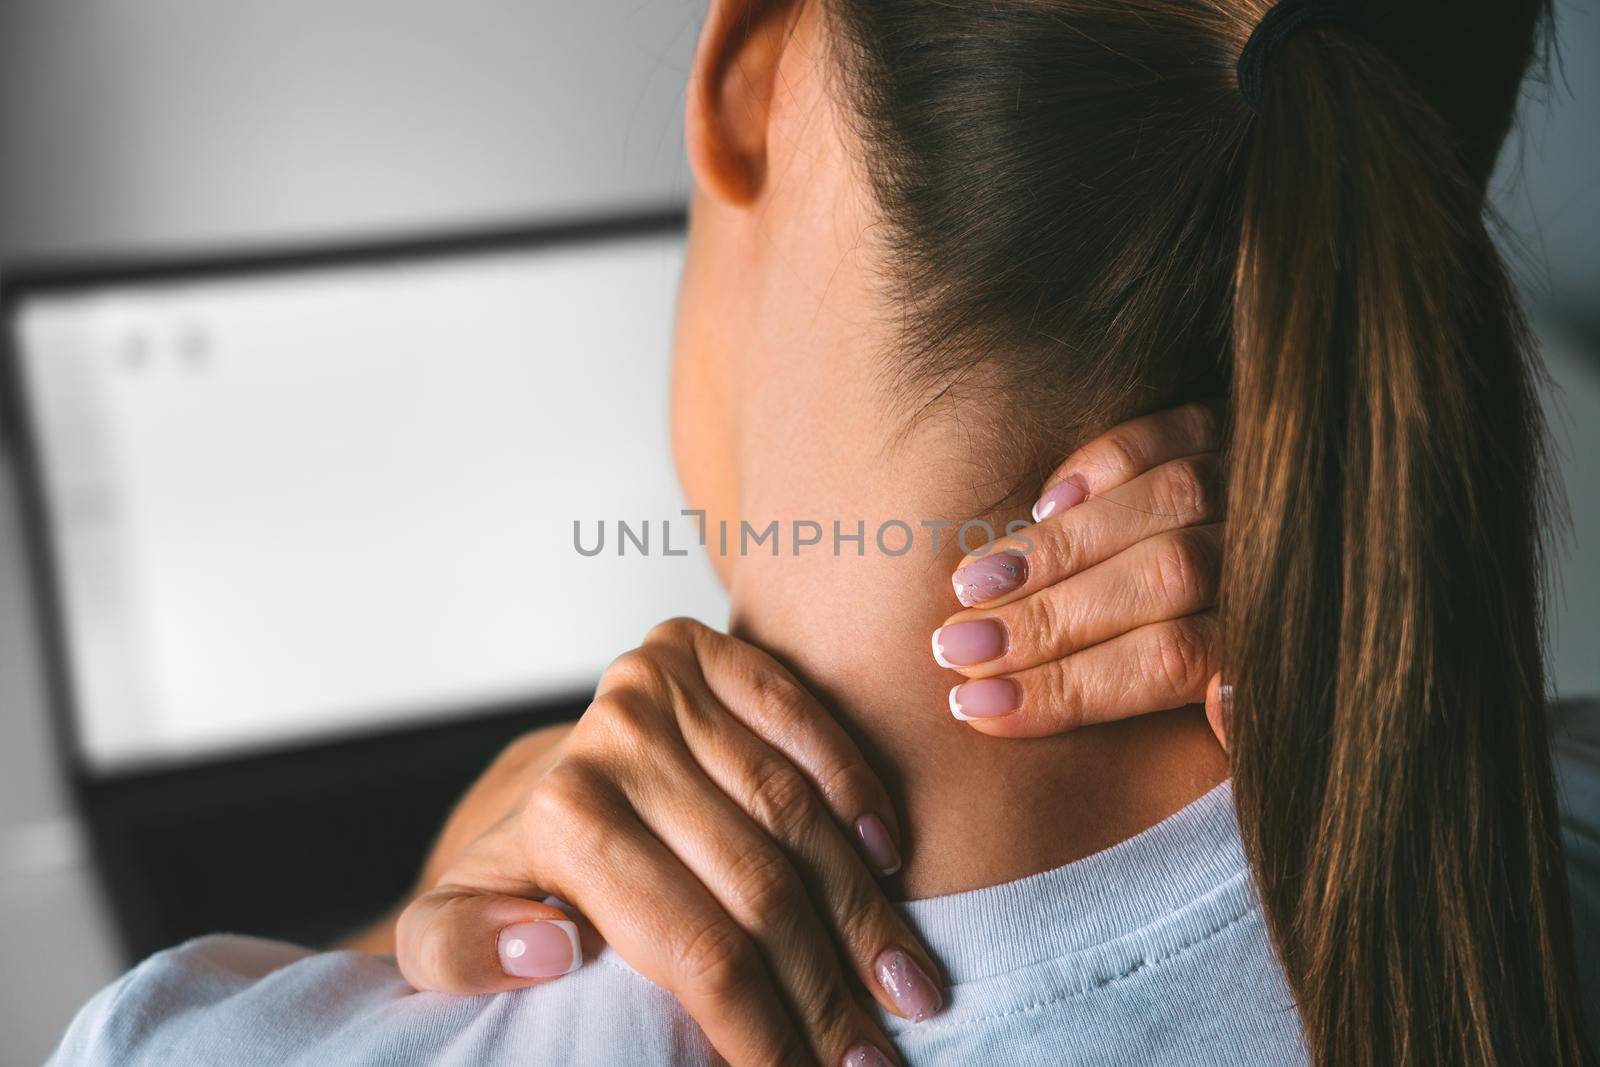 Young woman suffering from neck pain after working on pc and massaging neck to relieve pain by DariaKulkova